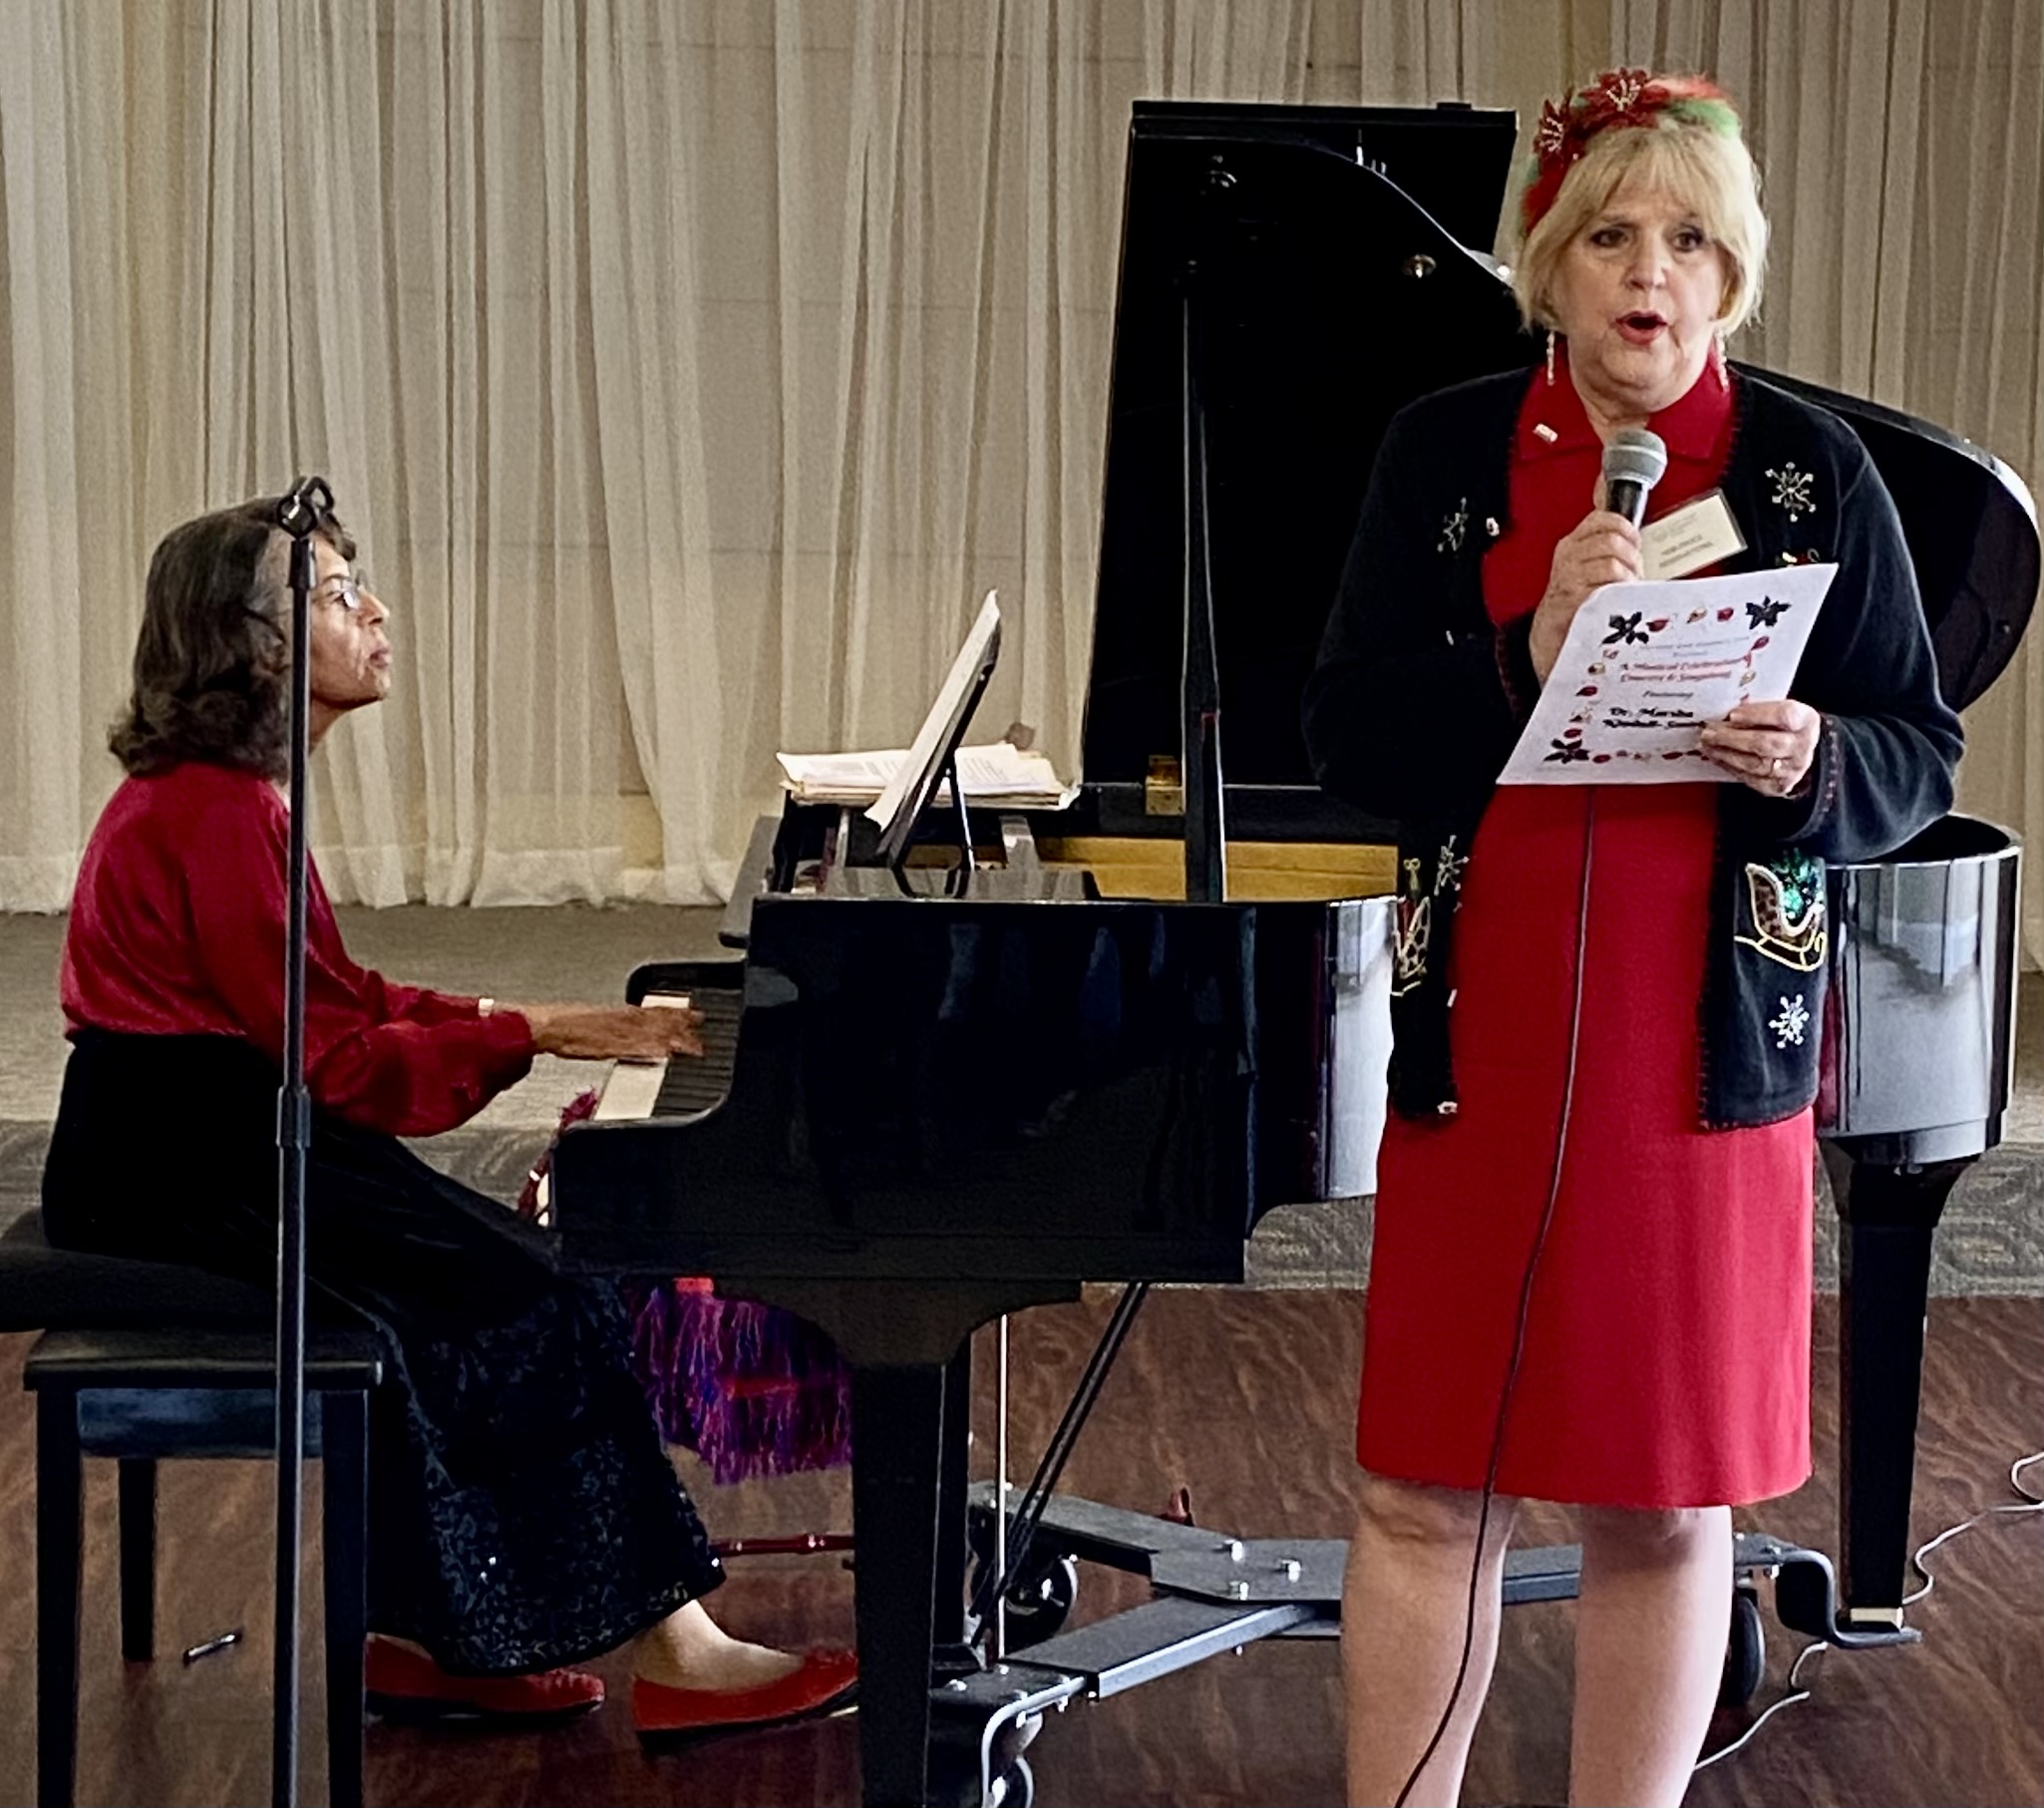 Dr Marsha Kindall-Smith played while Debi Frock led the sing along at the December Luncheon.